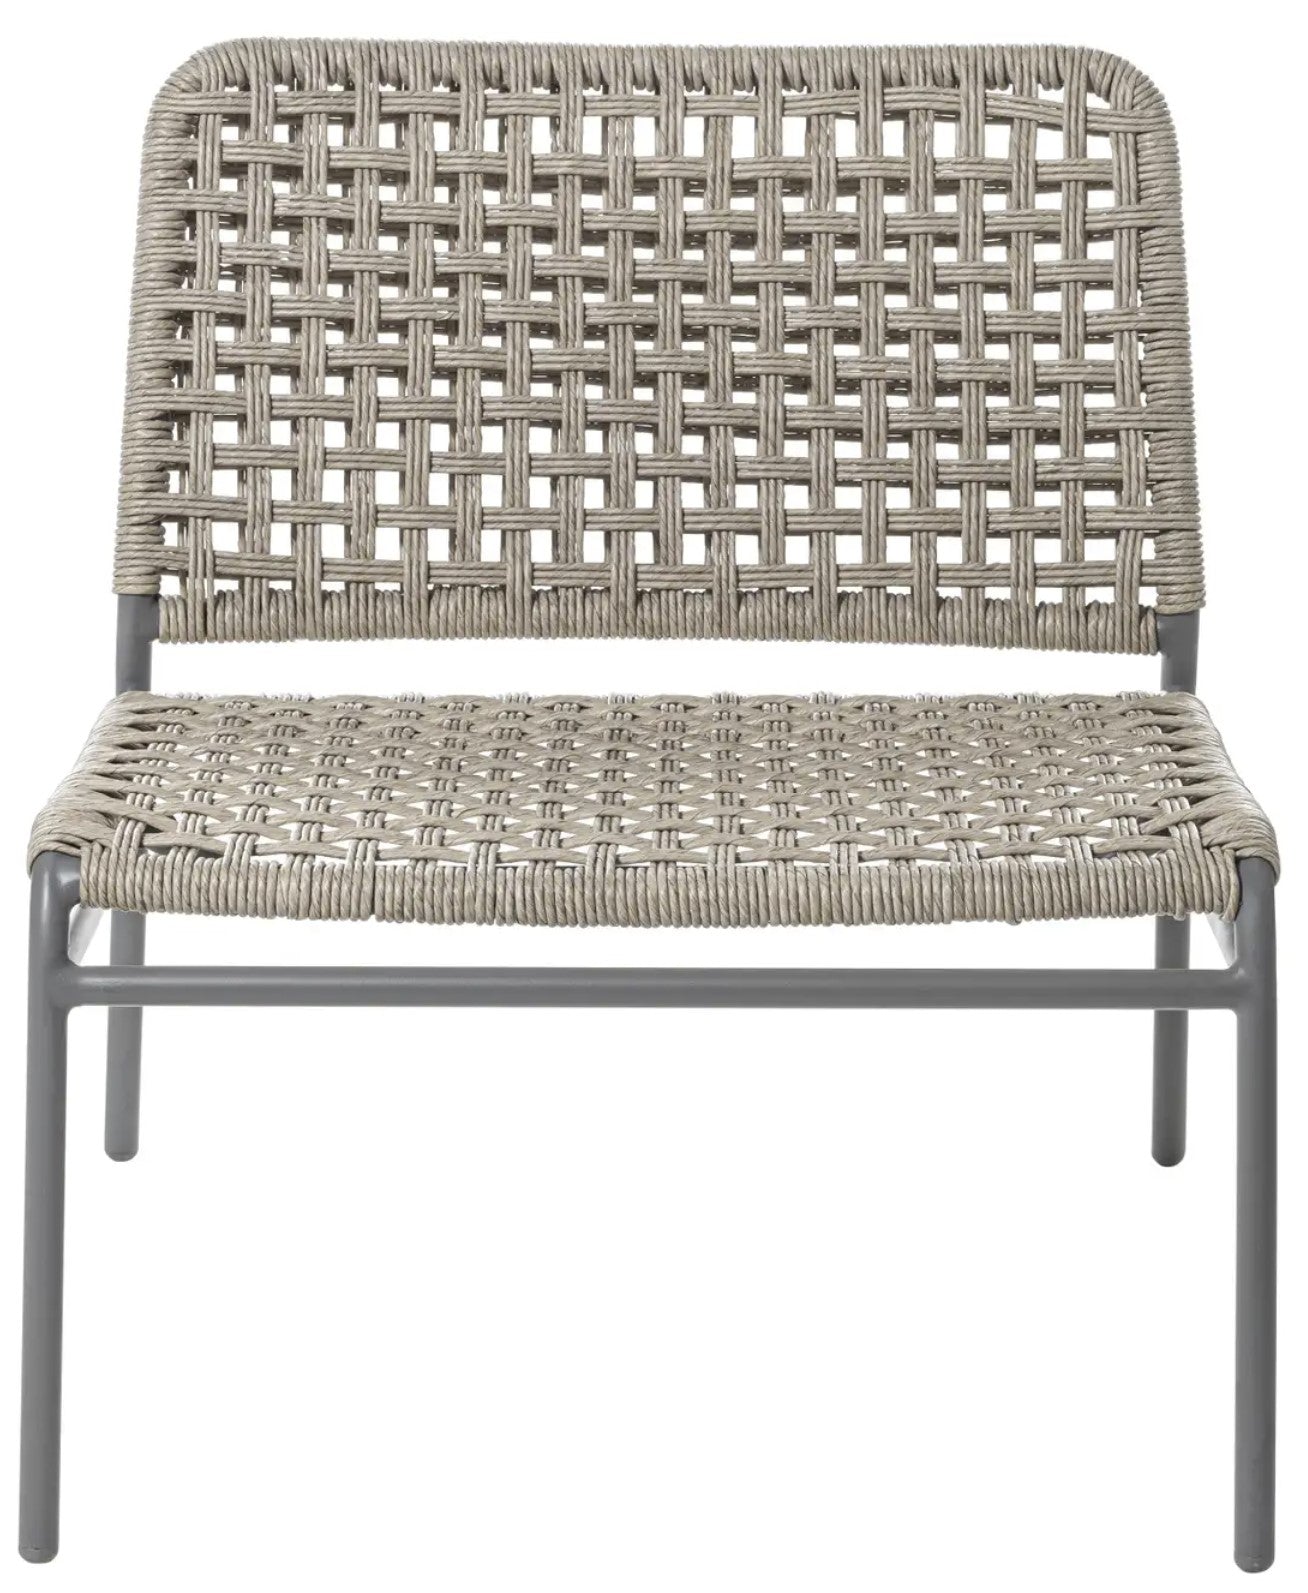 Straw Lounge Chair in Light Grey Aluminium Frame and Woven Resin Fiber - $1,520.00